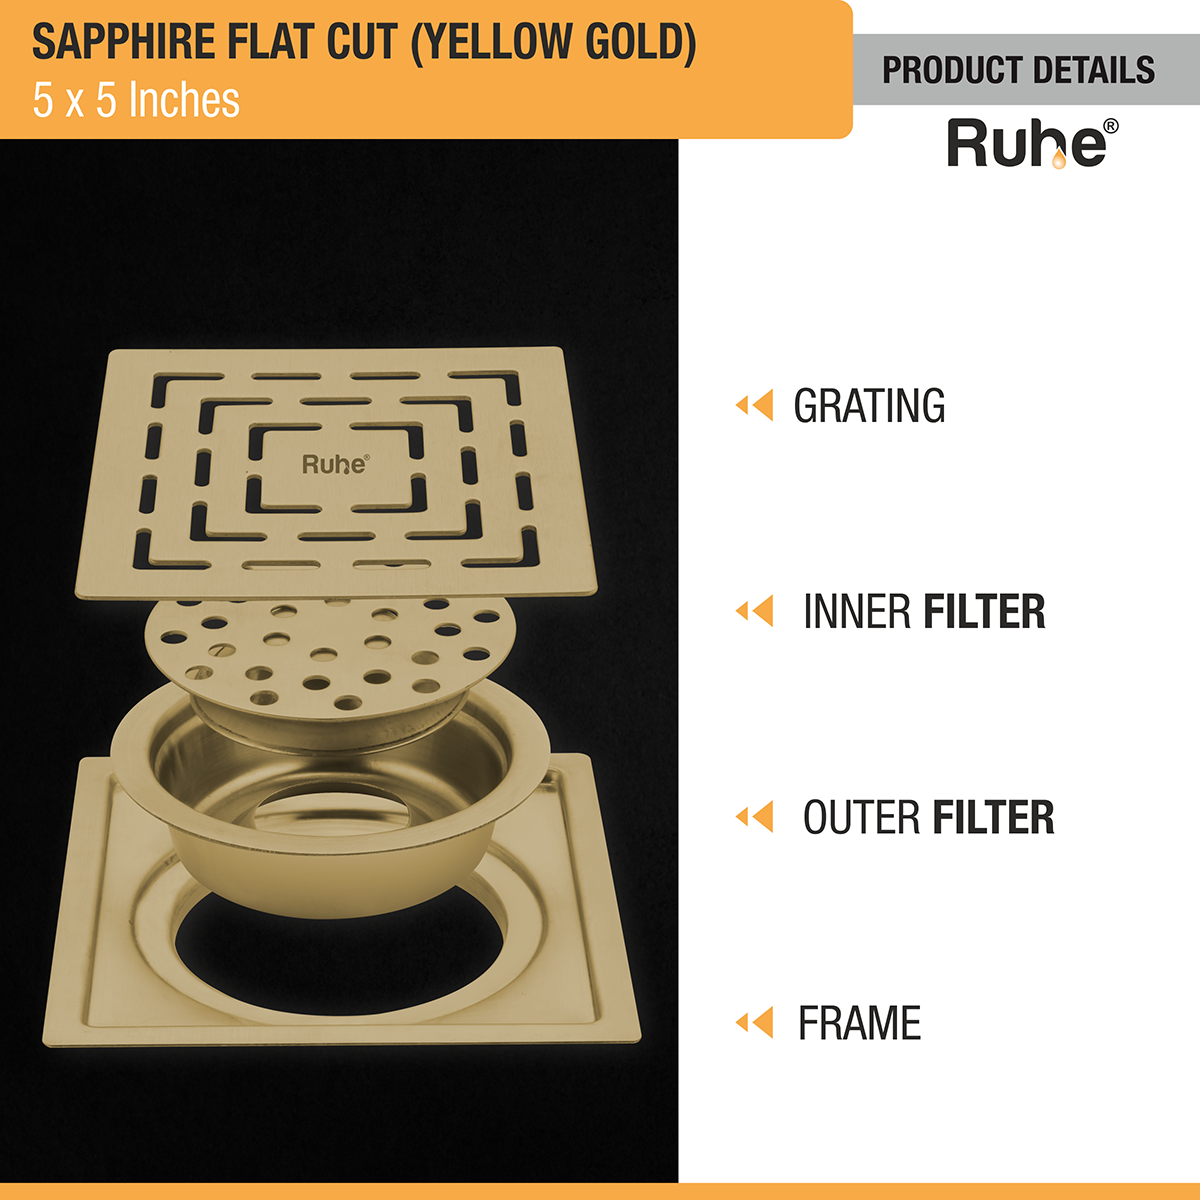 Sapphire Square Flat Cut Floor Drain in Yellow Gold PVD Coating (5 x 5 Inches) product details